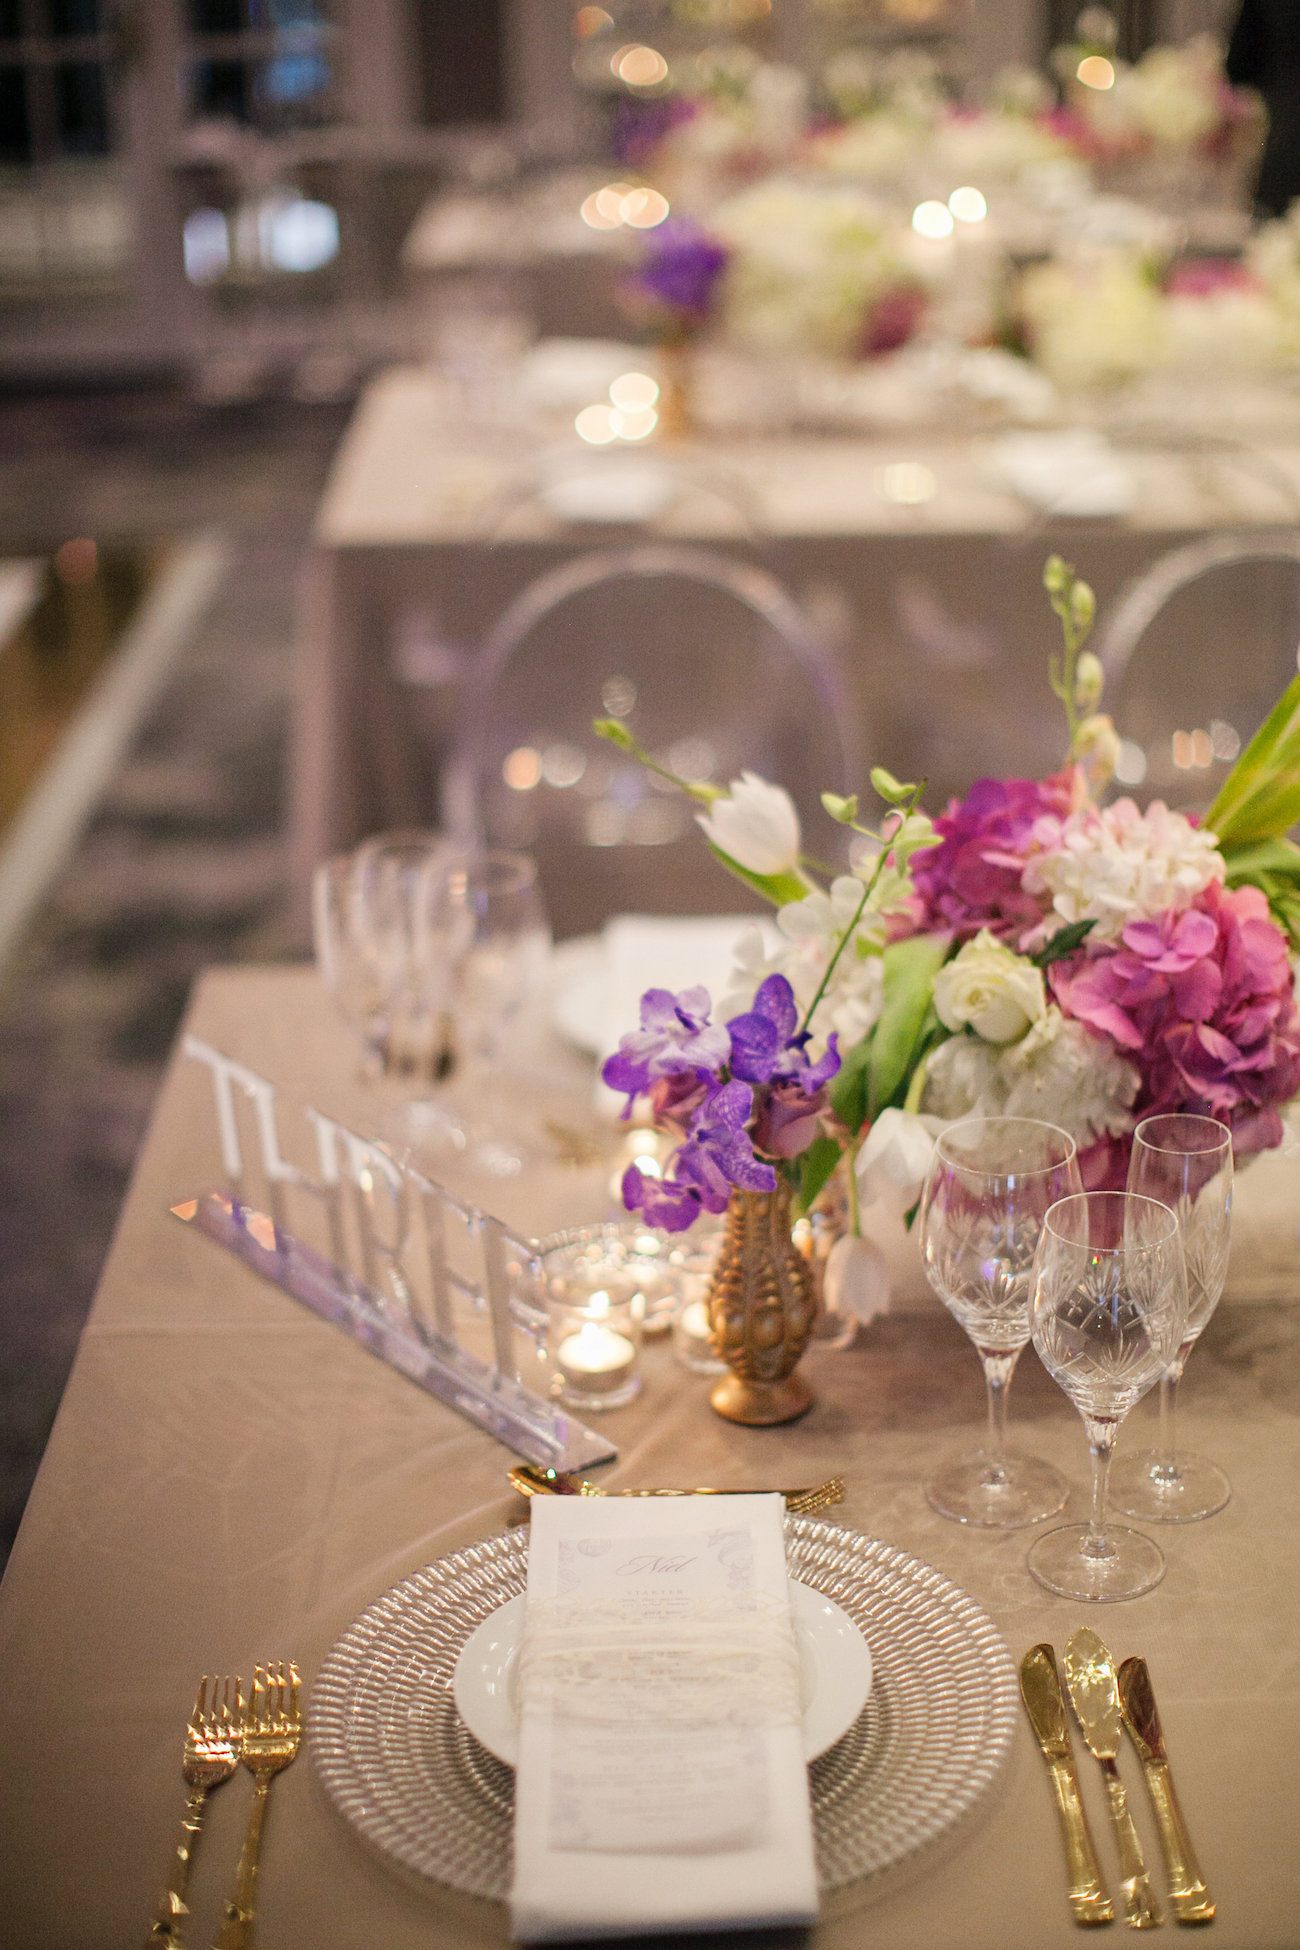 Laser Cut Acrylic Table Number | Credit: Tyme Photography & Wedding Concepts